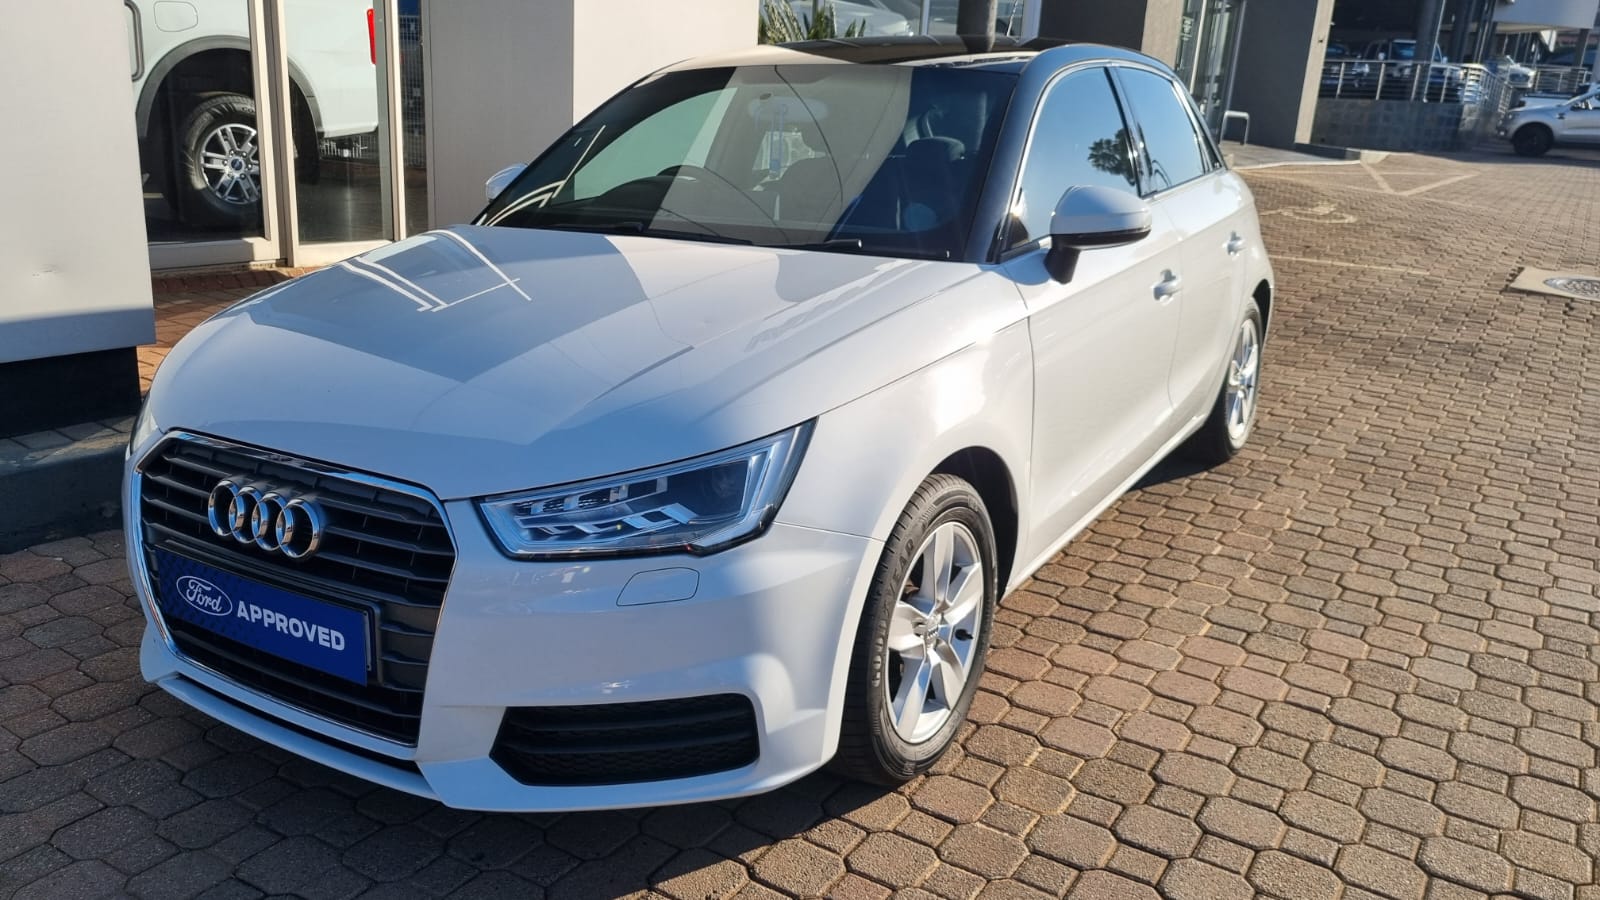 2017 Audi A1  for sale - UF70763